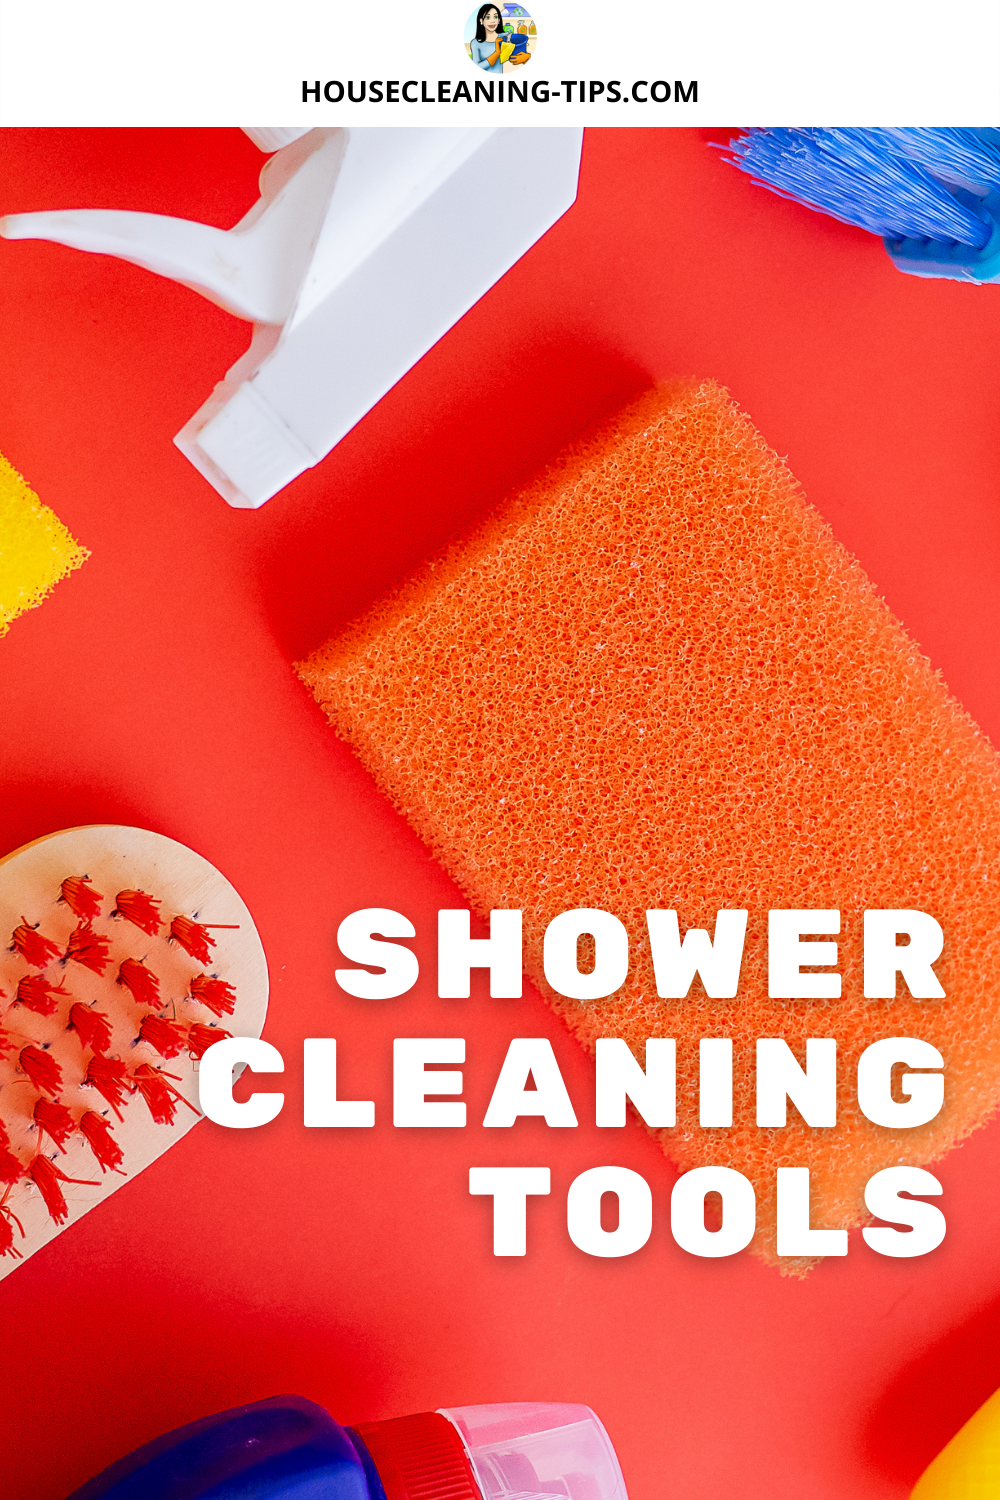 https://www.housecleaning-tips.com/image-files/shower-cleaning-tools.png